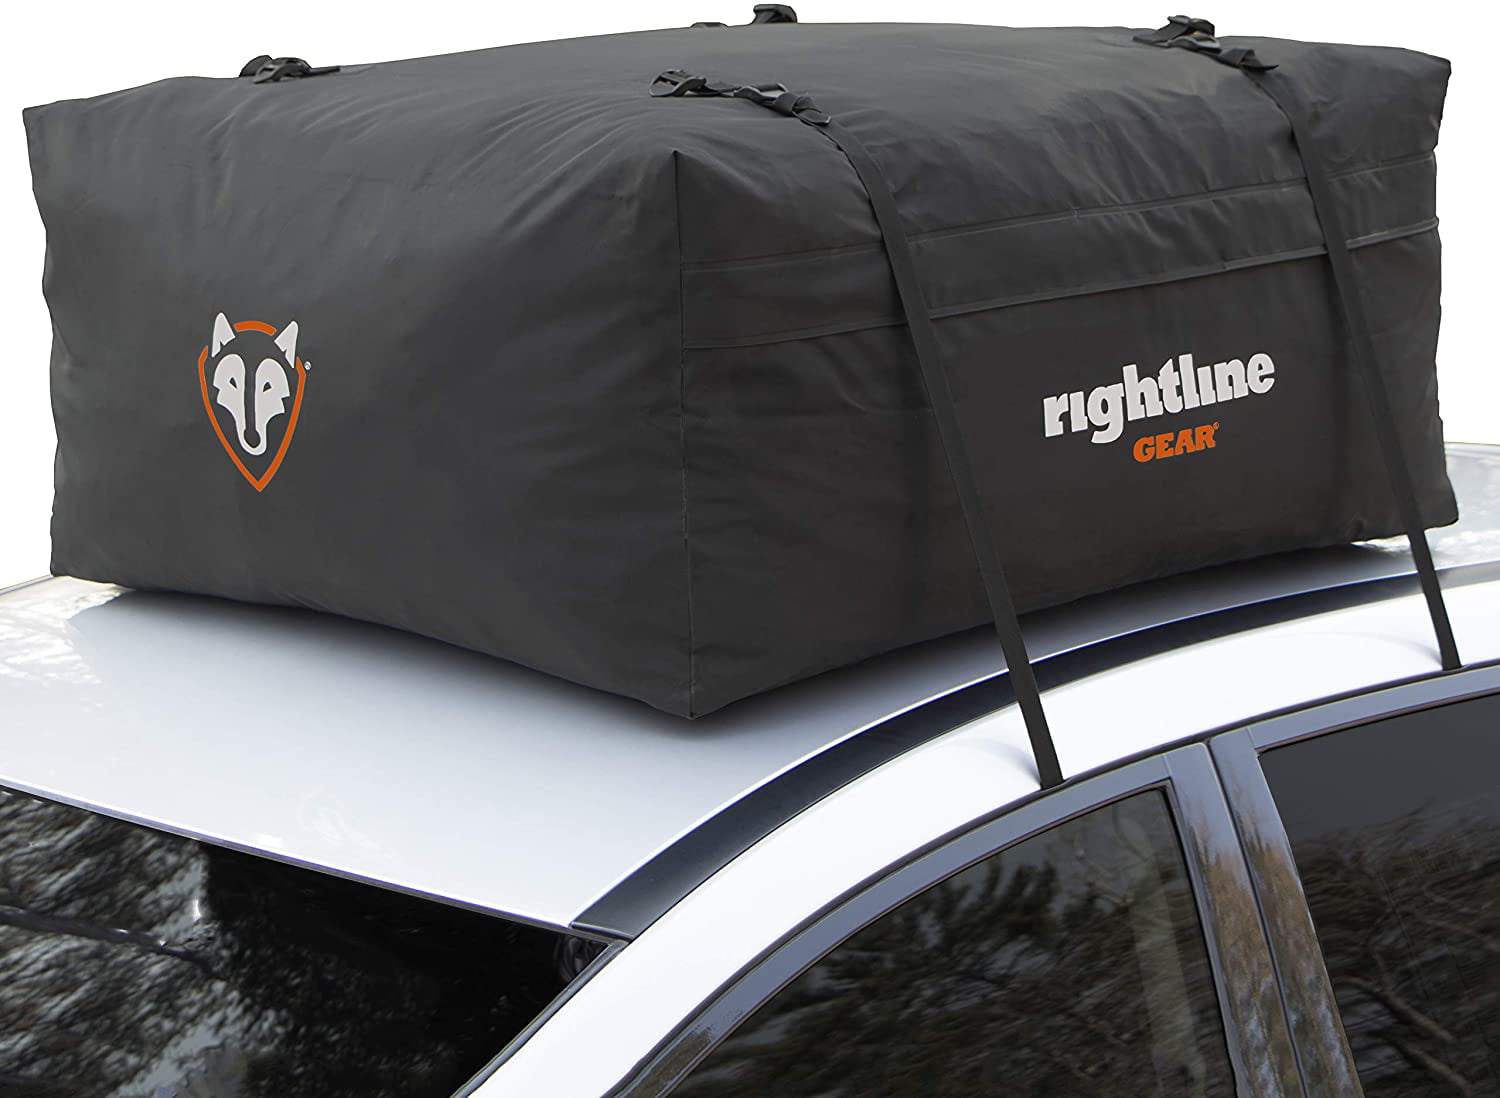 Rightline Gear Range 2 Car Top Carrier, 15 cu ft, Weatherproof +, Attaches  With or Without Roof Rack